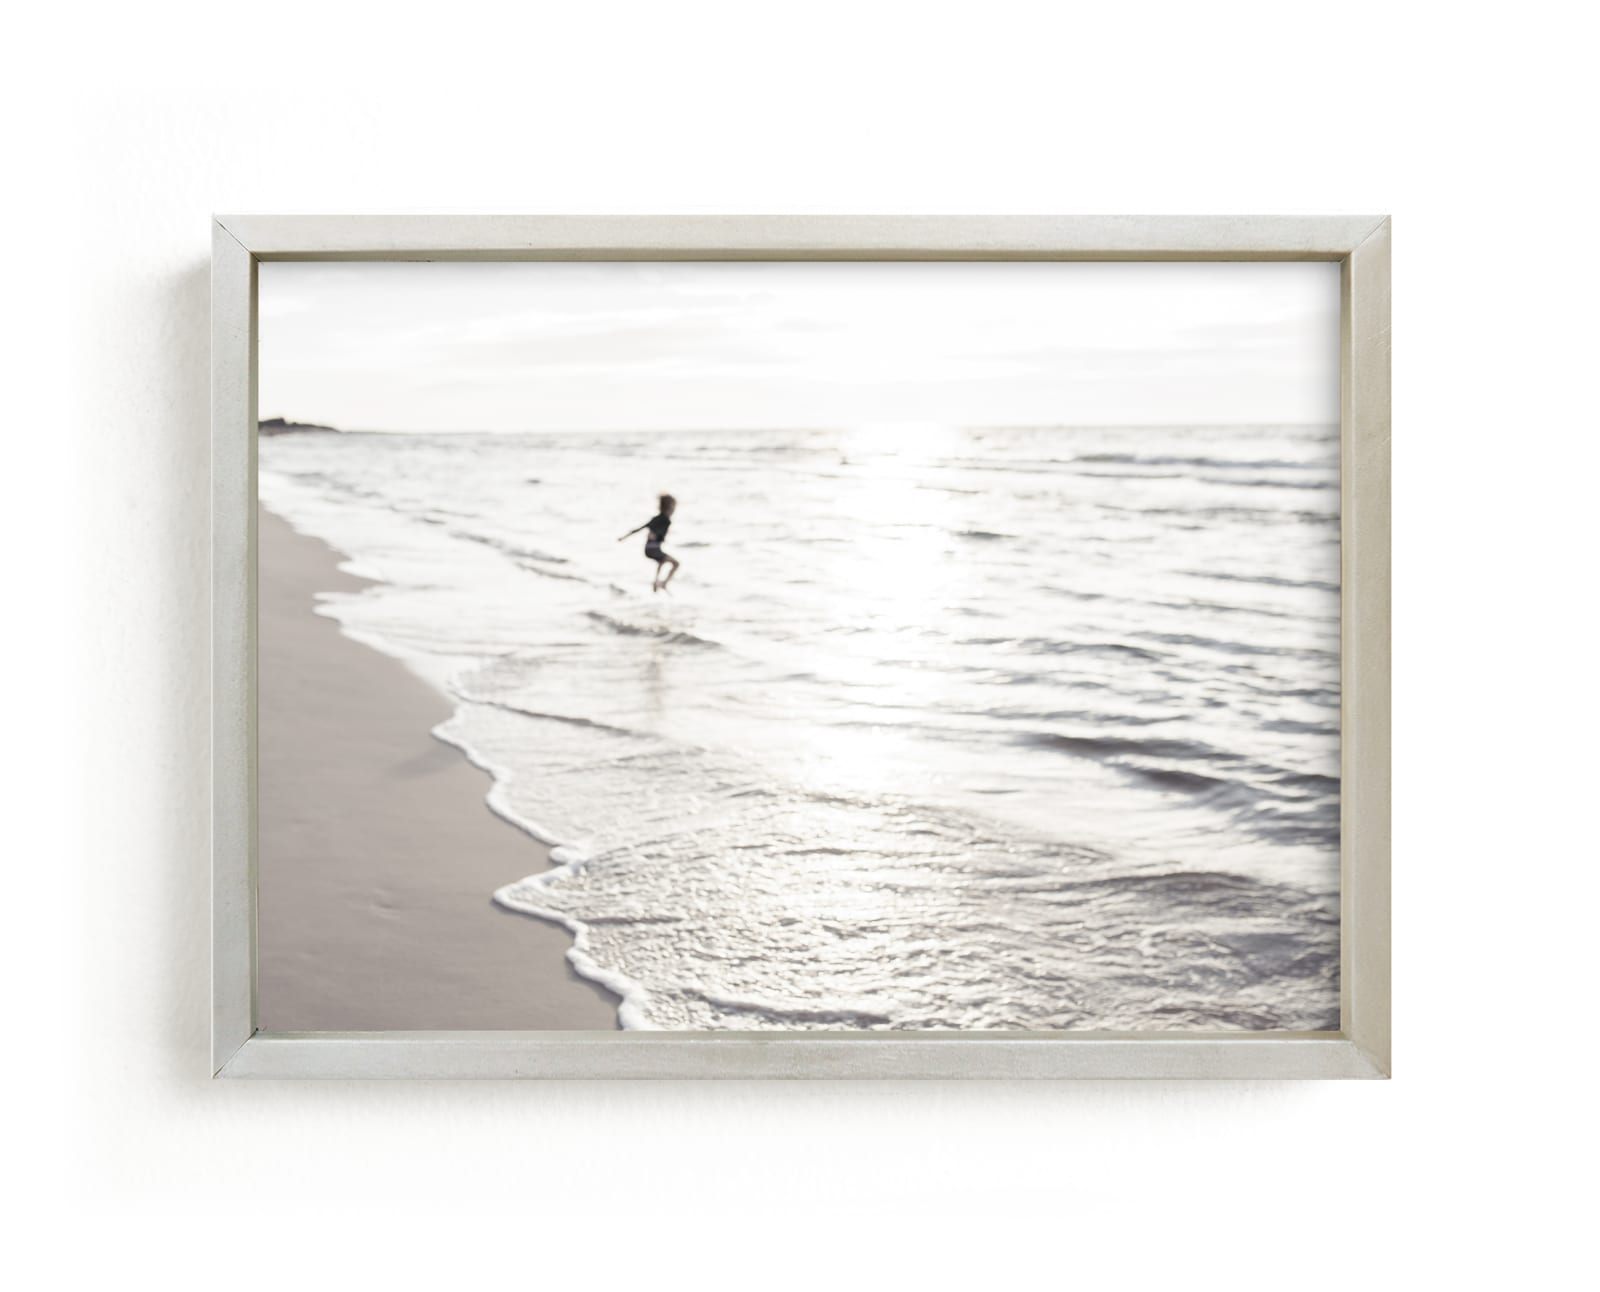 "I love freedom" by Lying on the grass in beautiful frame options and a variety of sizes.